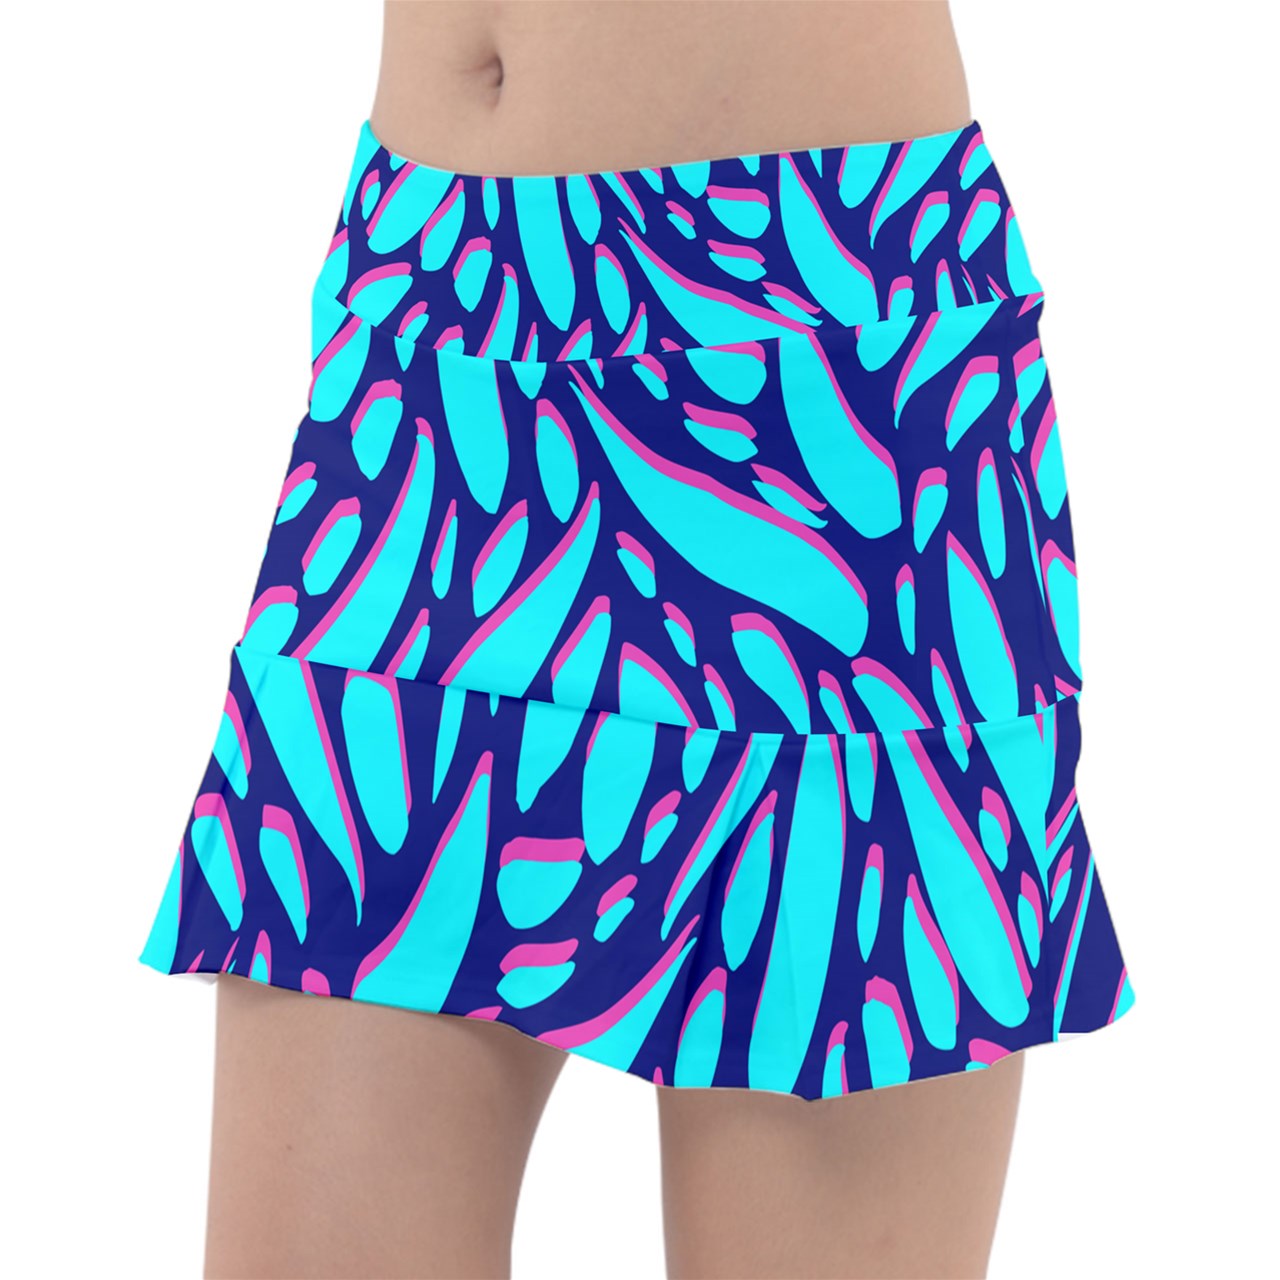 Dizzy Pickle Lesia Petals BBP Women's Pickleball Classic Skort with Inner Shorts and Pockets